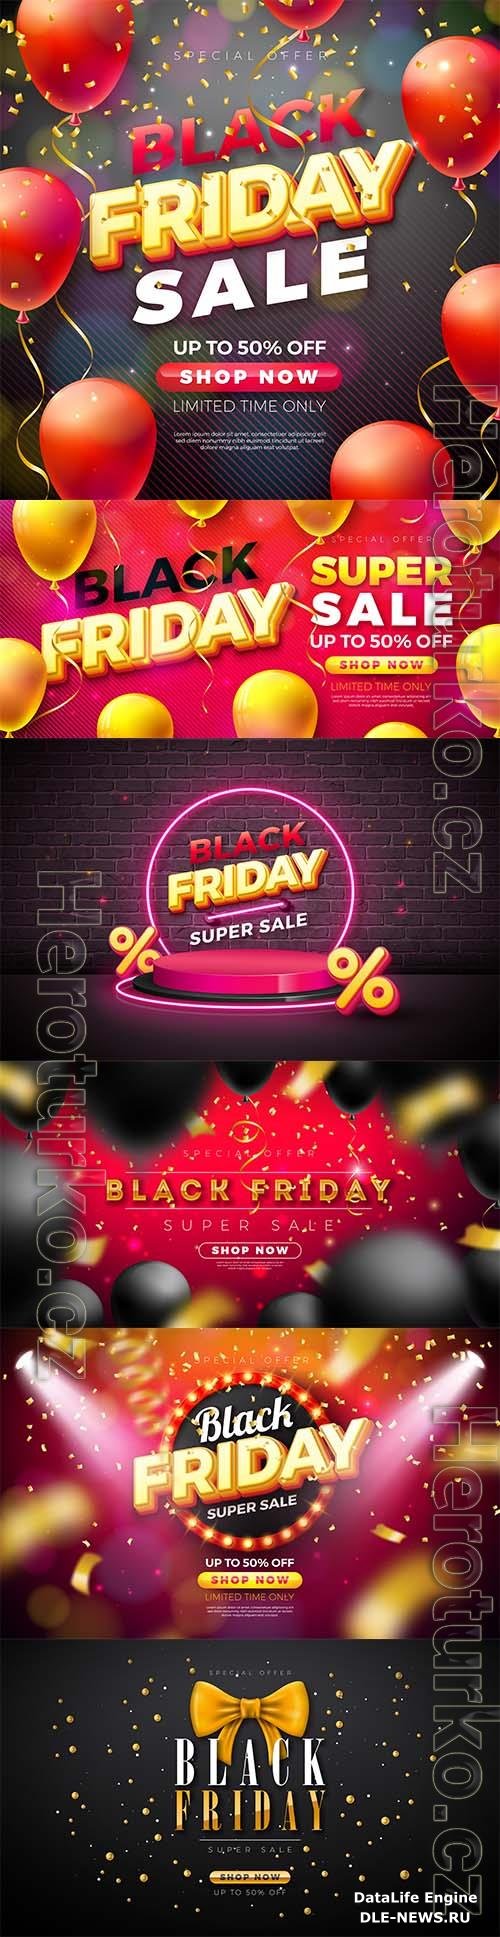 Black friday super sale illustration with magic gold text lettering